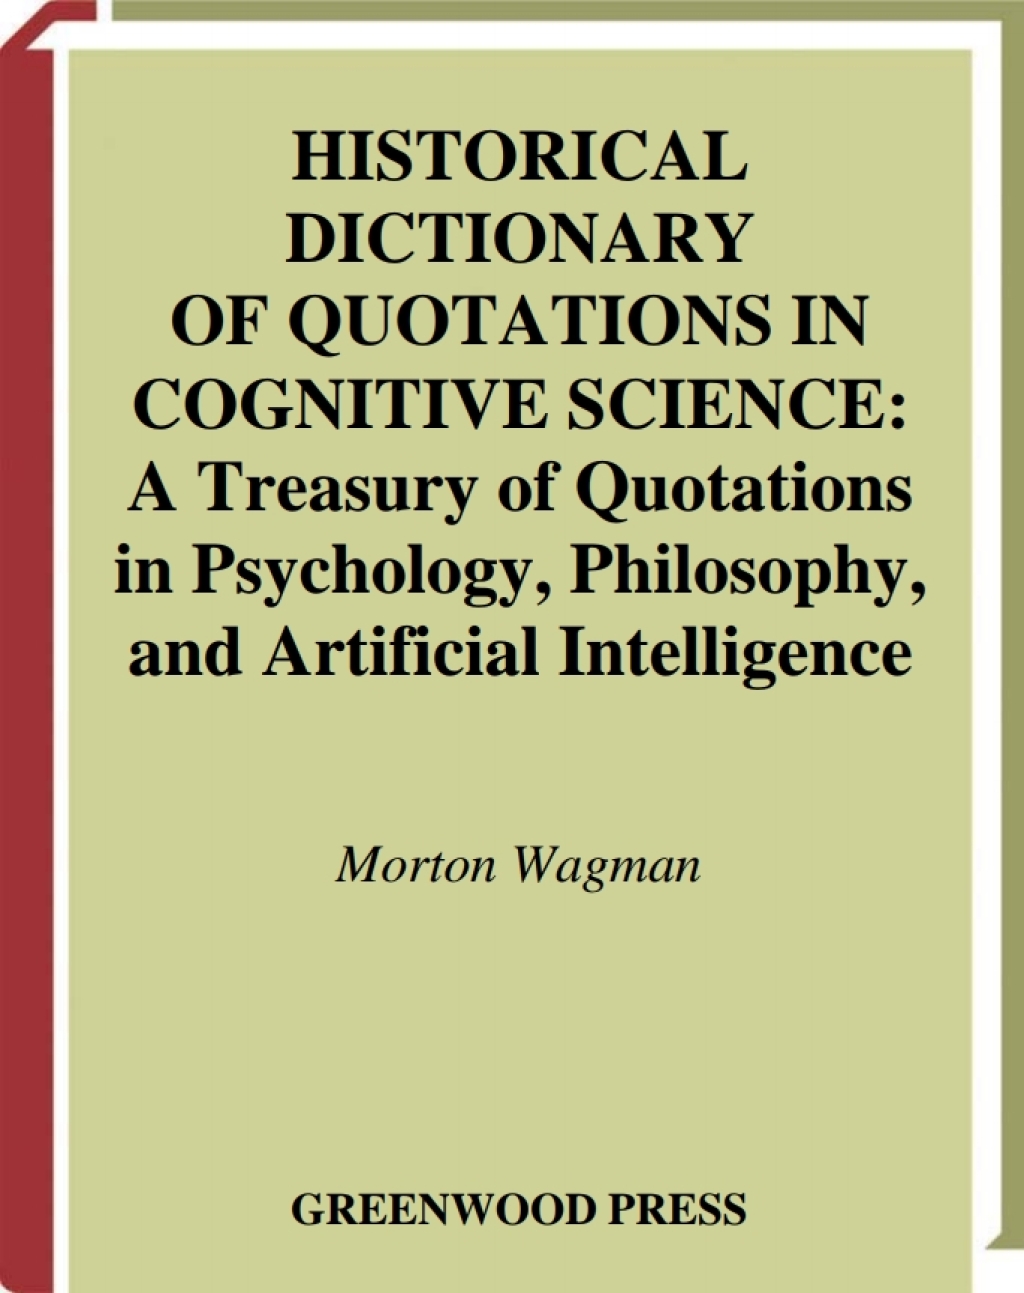 Historical Dictionary of Quotations in Cognitive Science - 1st Edition (eBook Rental)